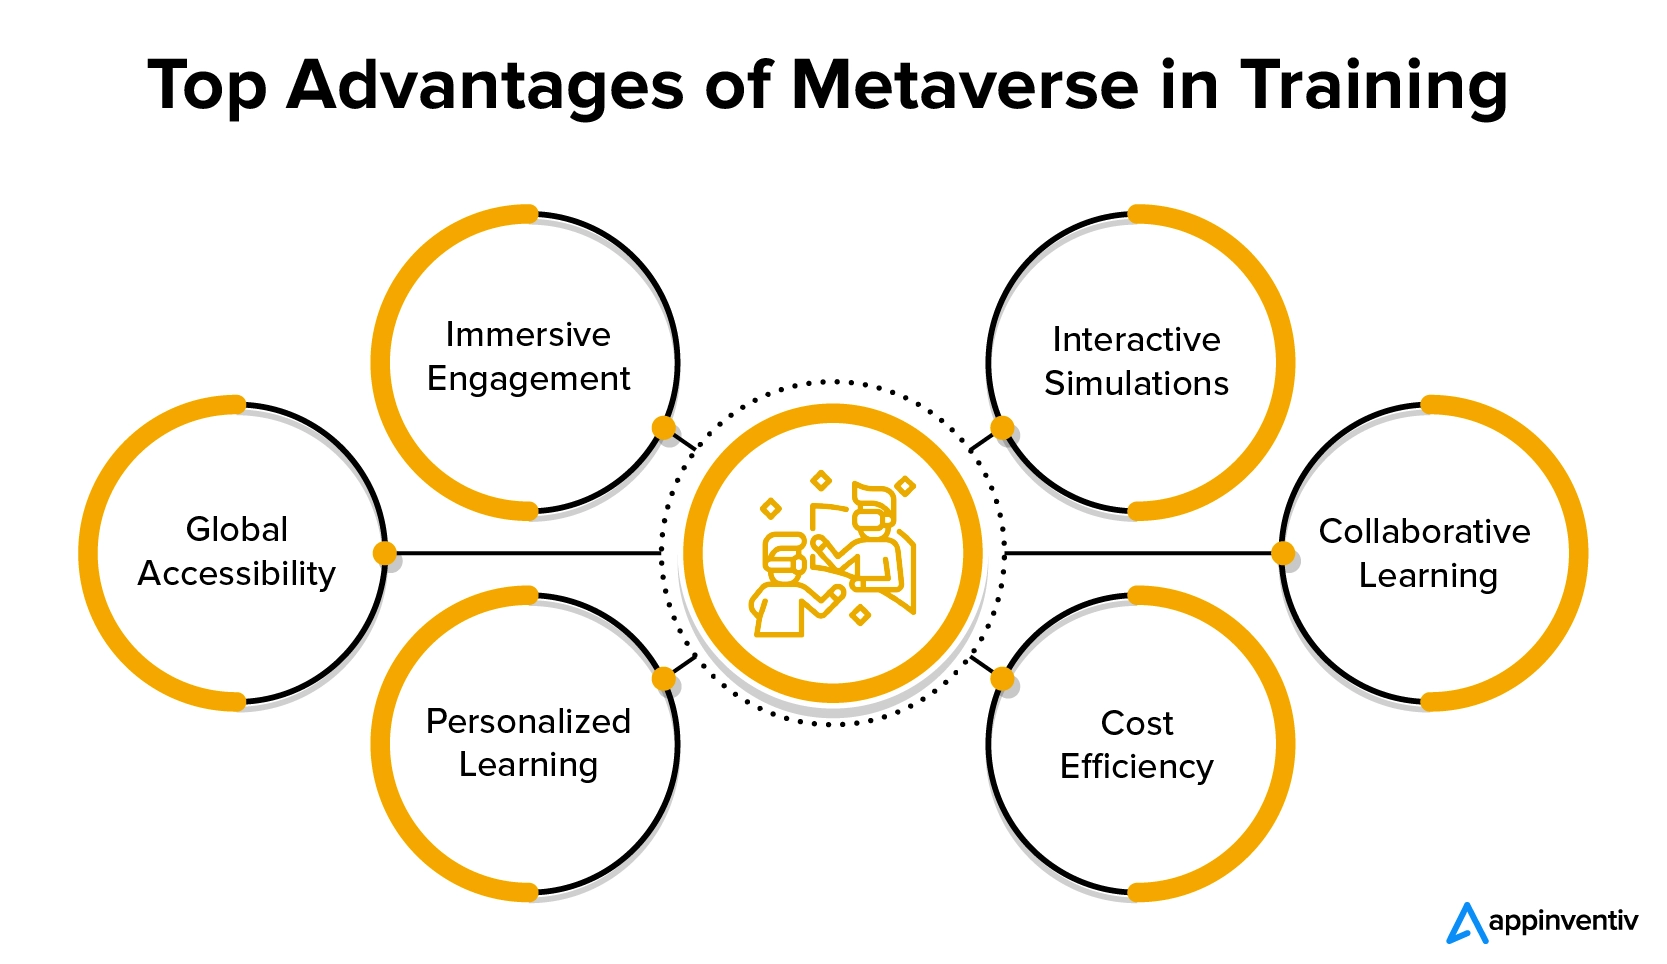 Top Advantages of Metaverse in Training